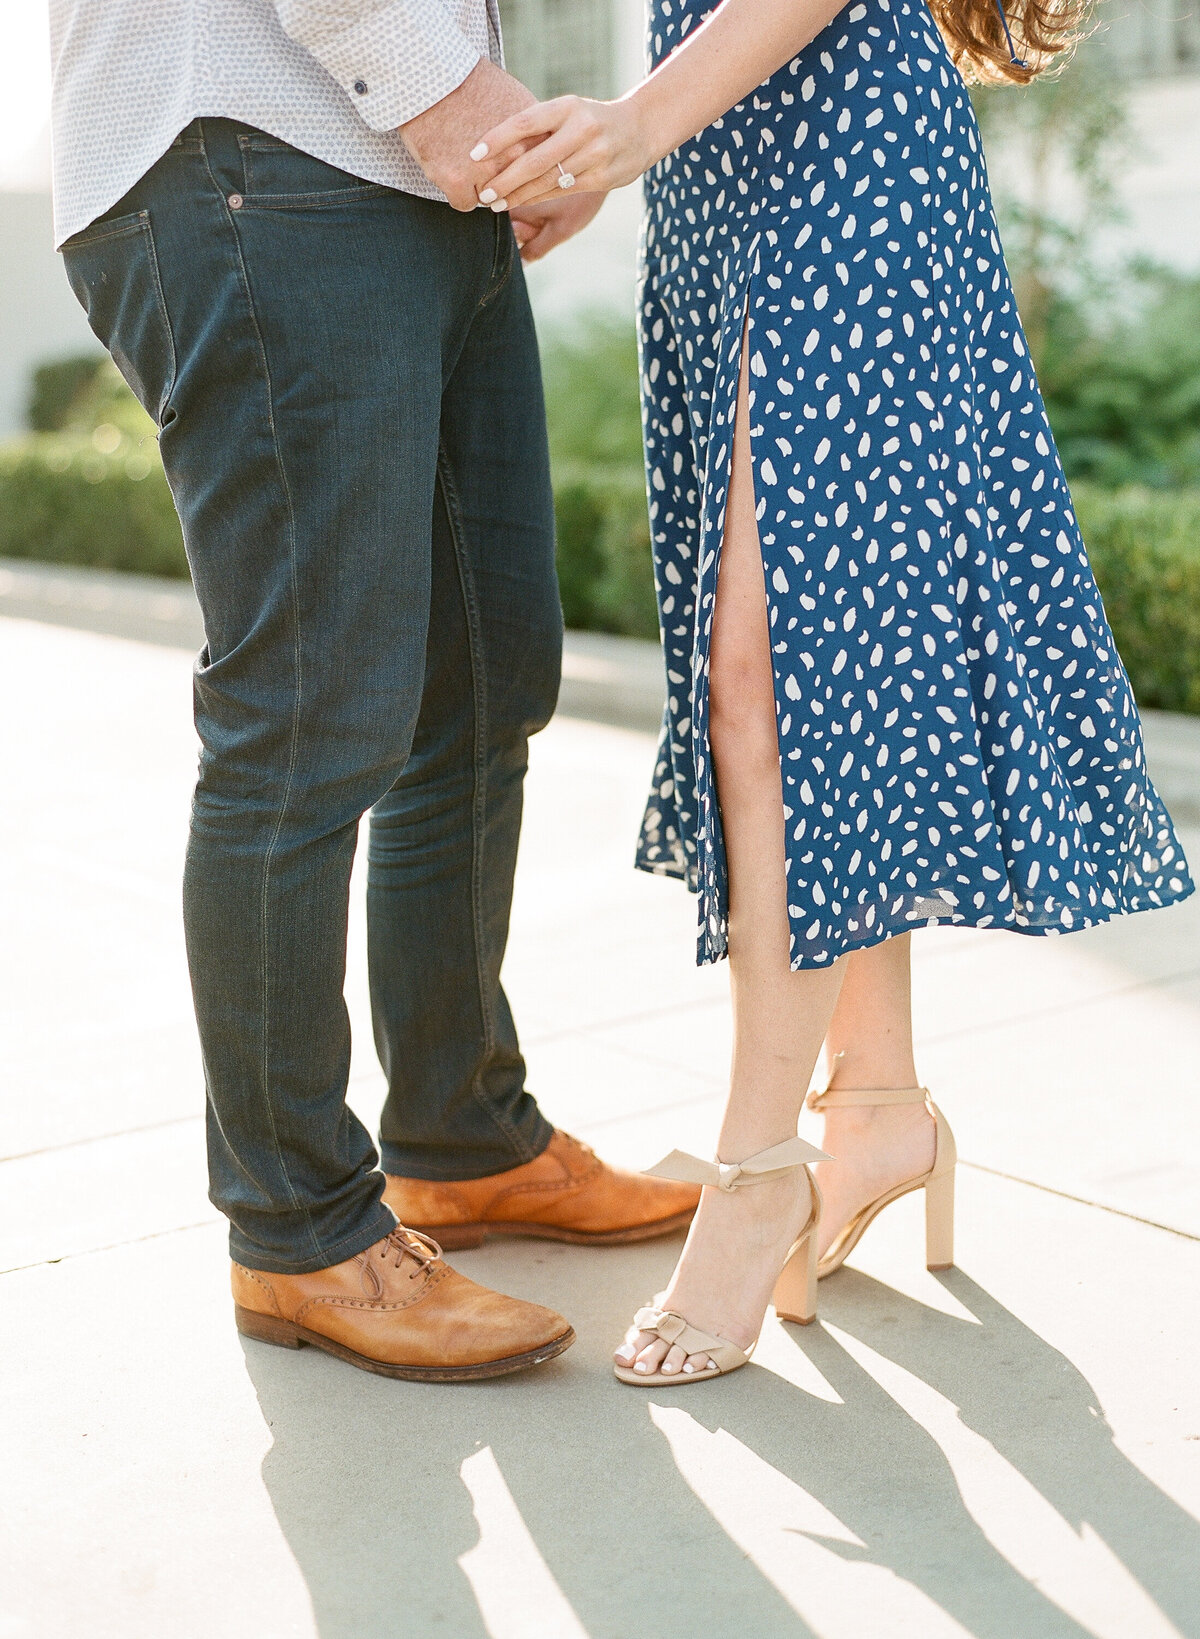 Griffith Observatory Engagement-16